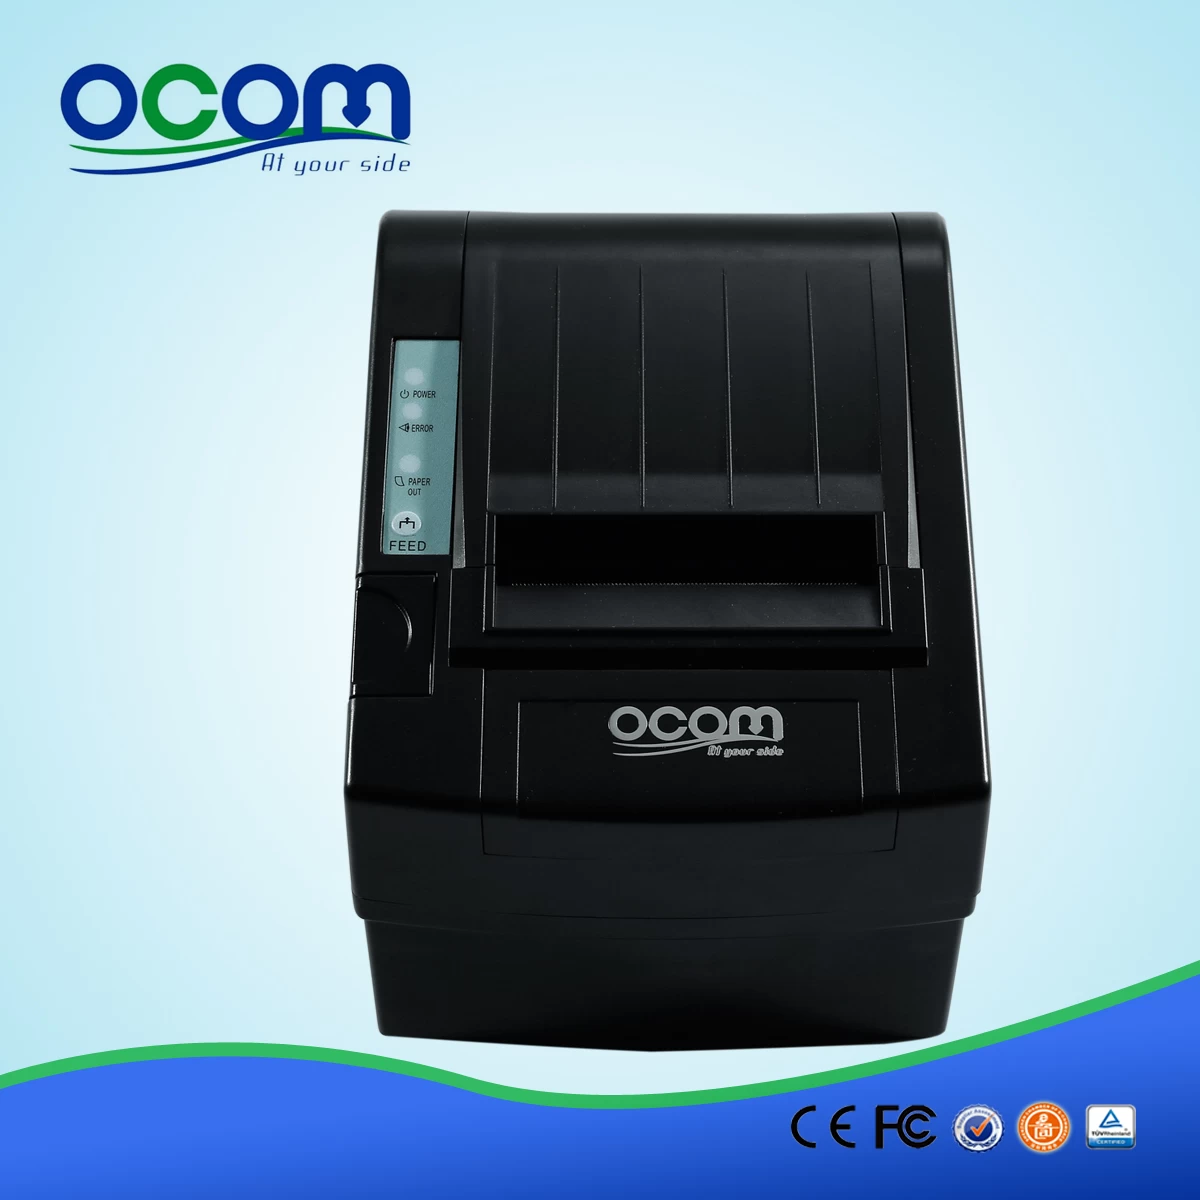 (OCPP-806-W) 80MM Wireless WIFI Thermal POS Printer With Auto Cutter